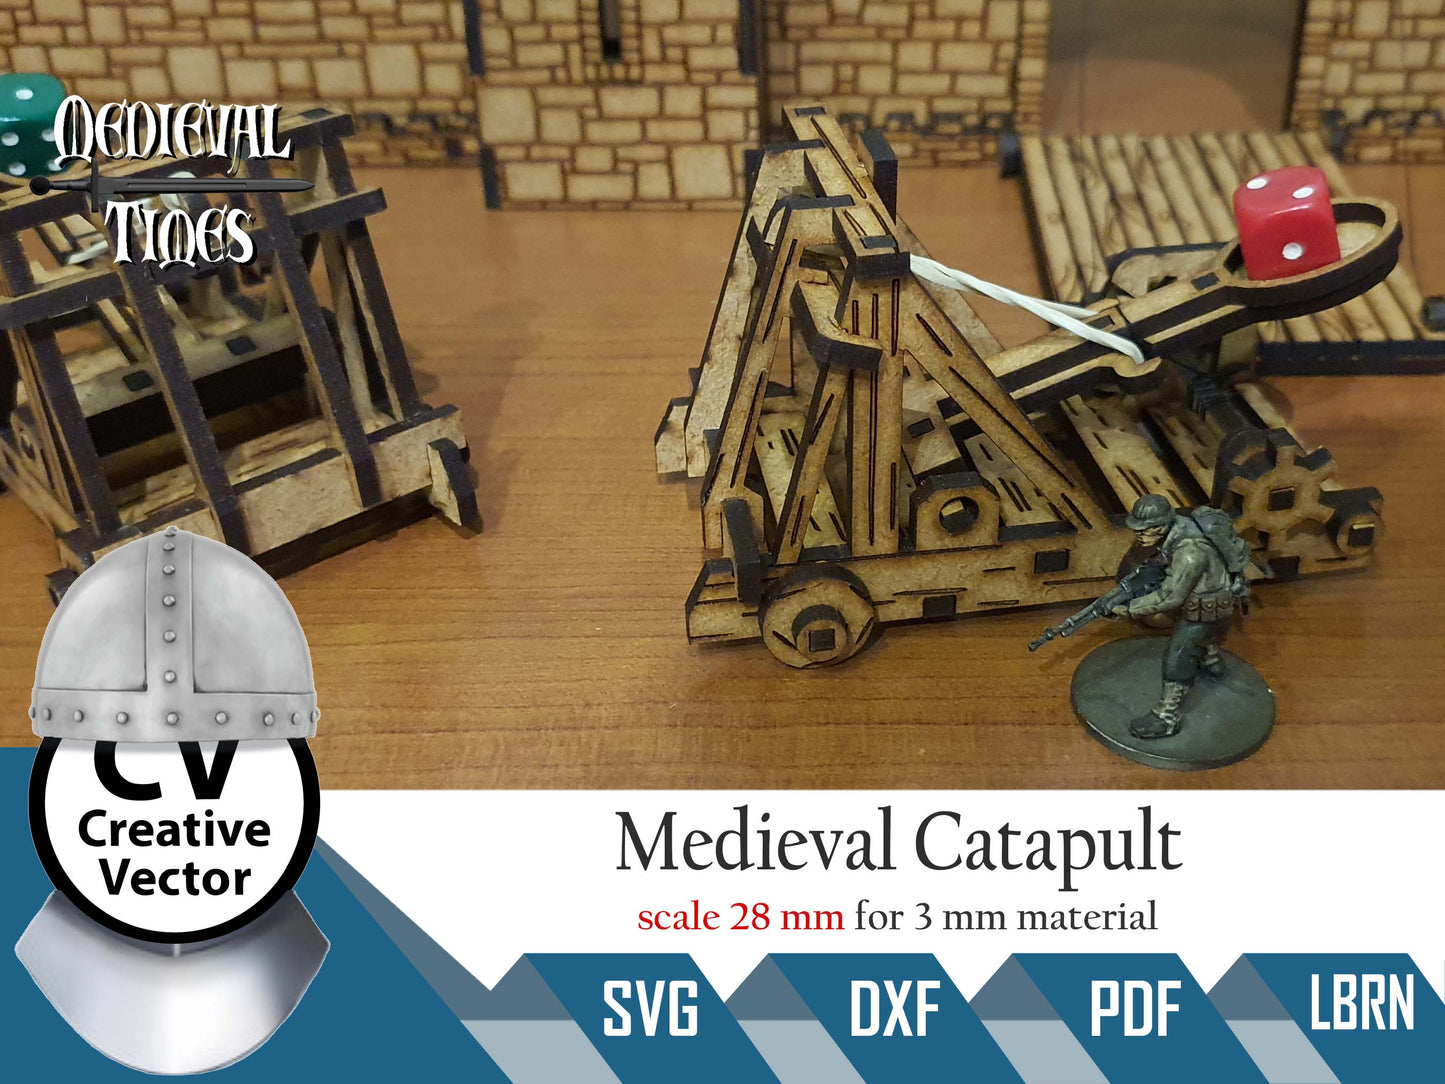 Medieval Catapult in scale 28 mm